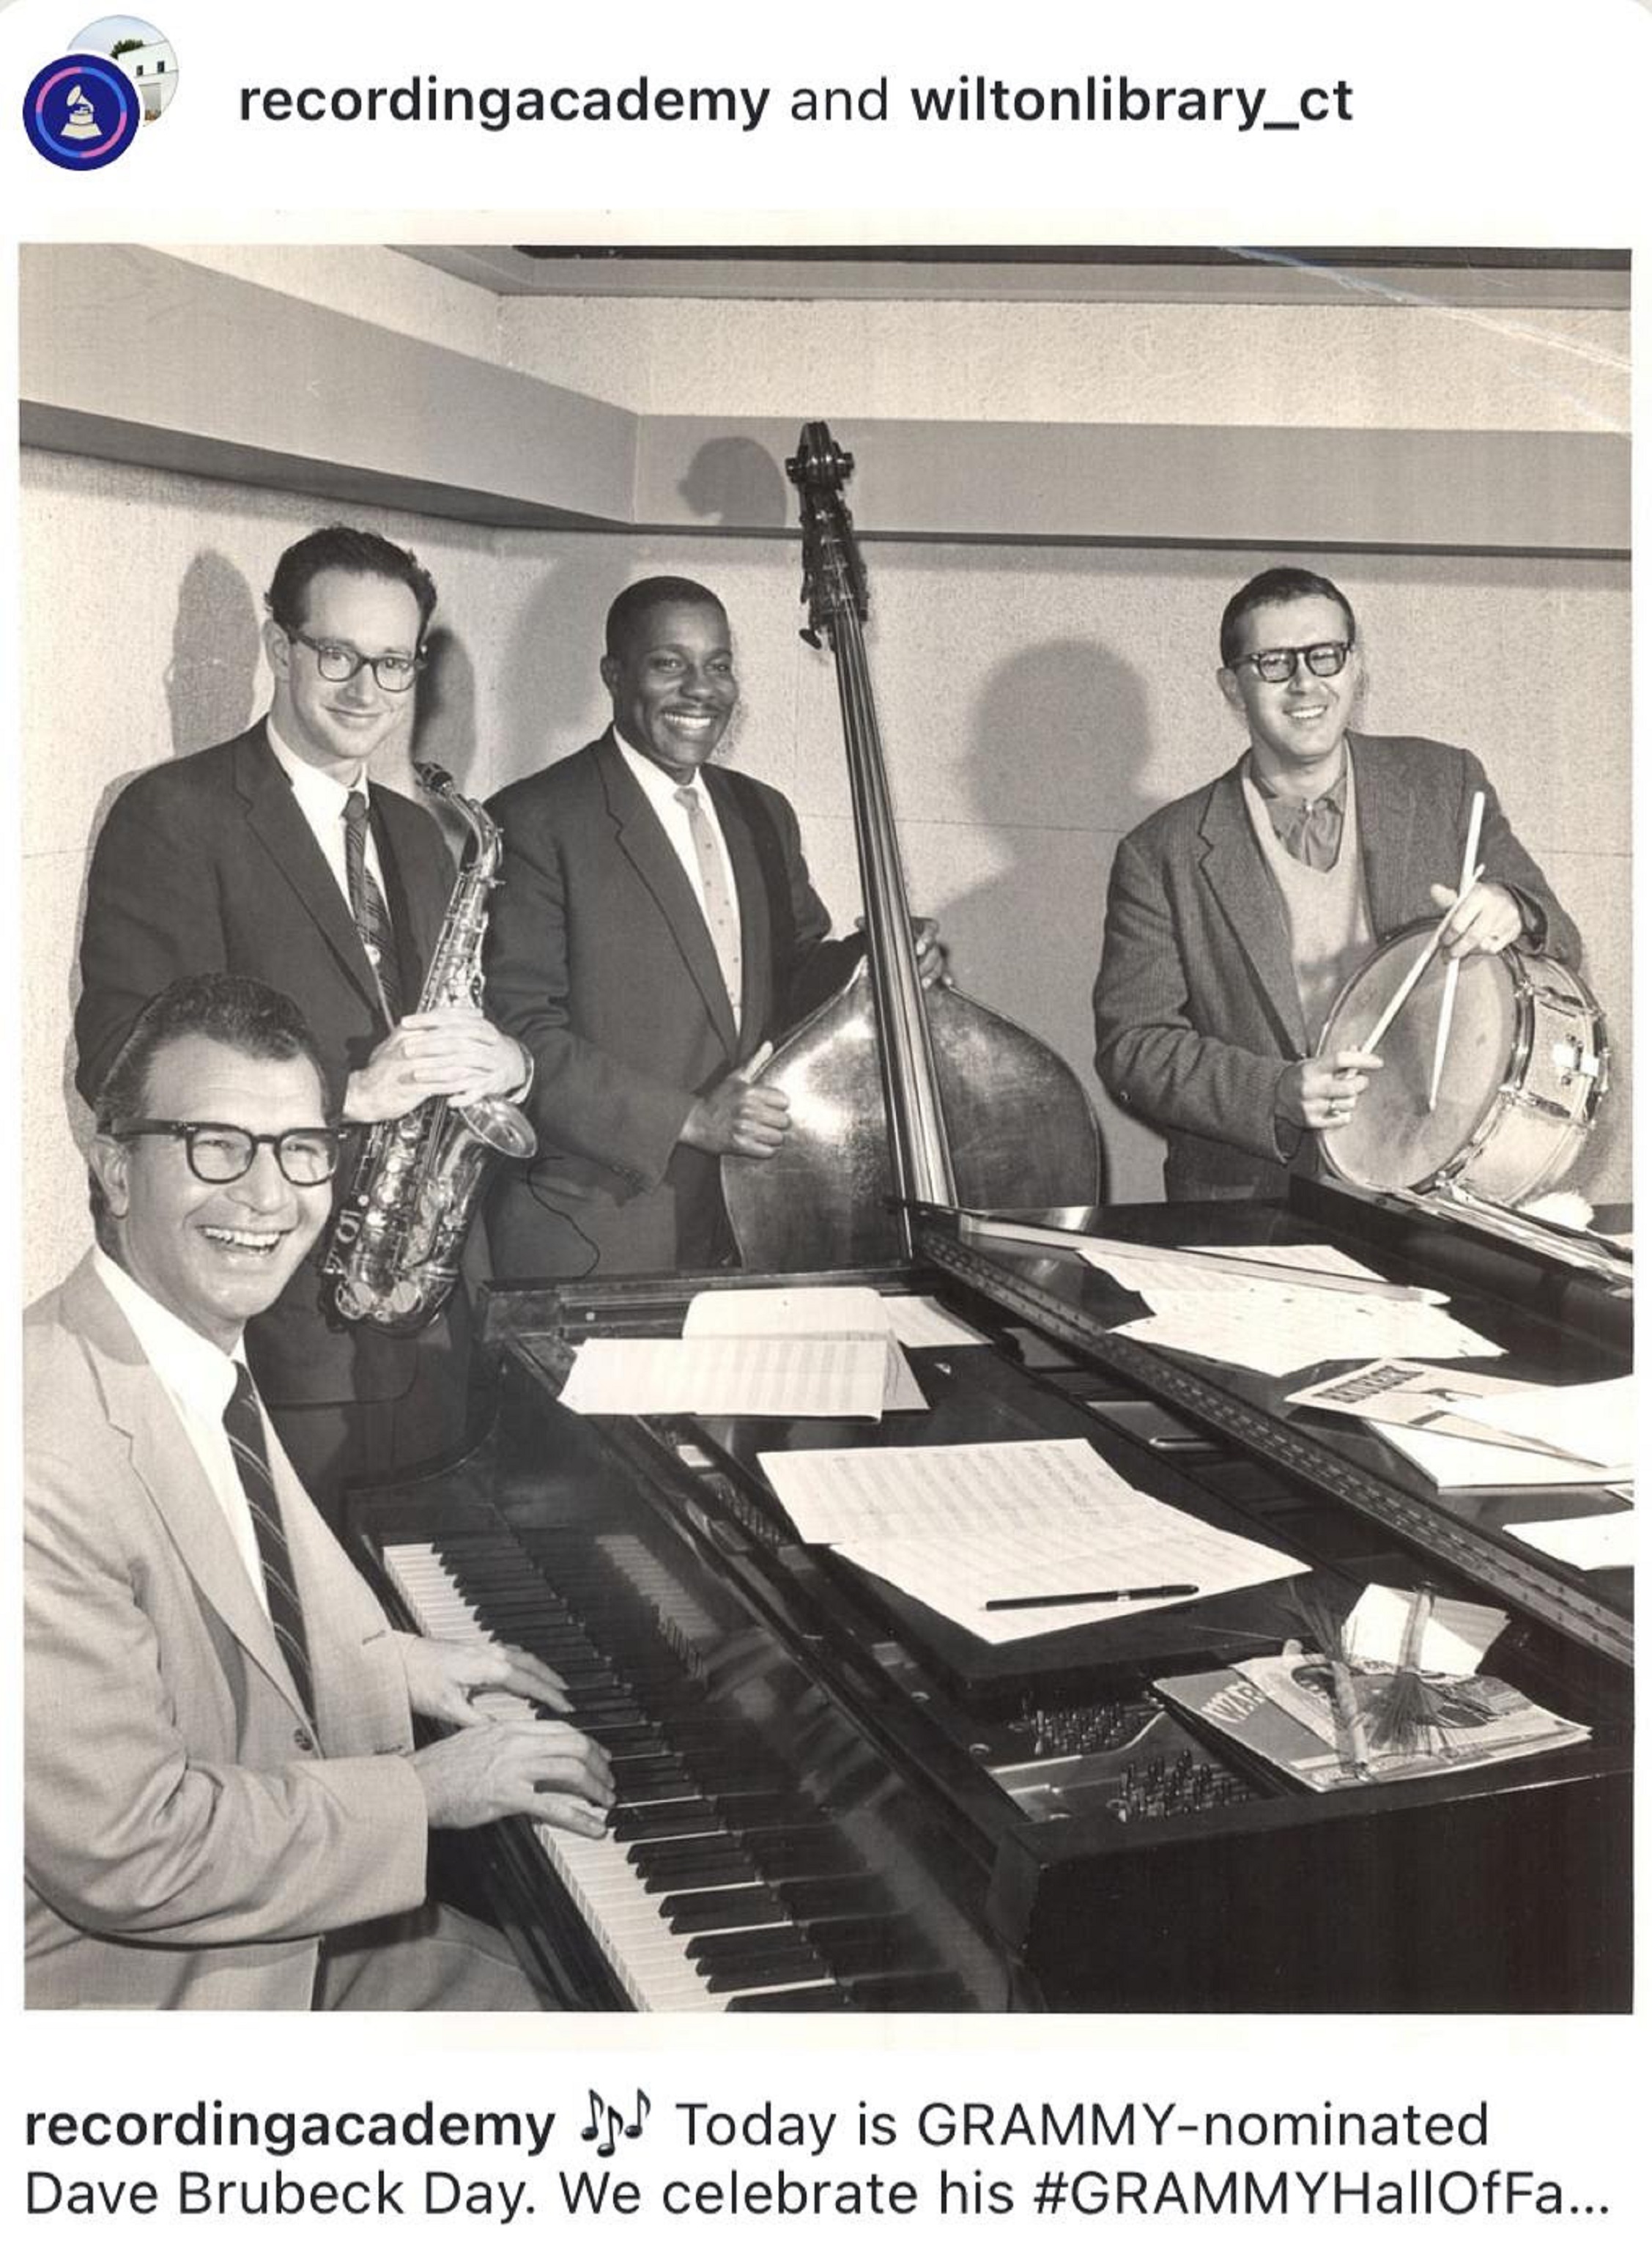 Wilton Library's Brubeck Collection Launches Interactive Digital Archive with Exciting Events